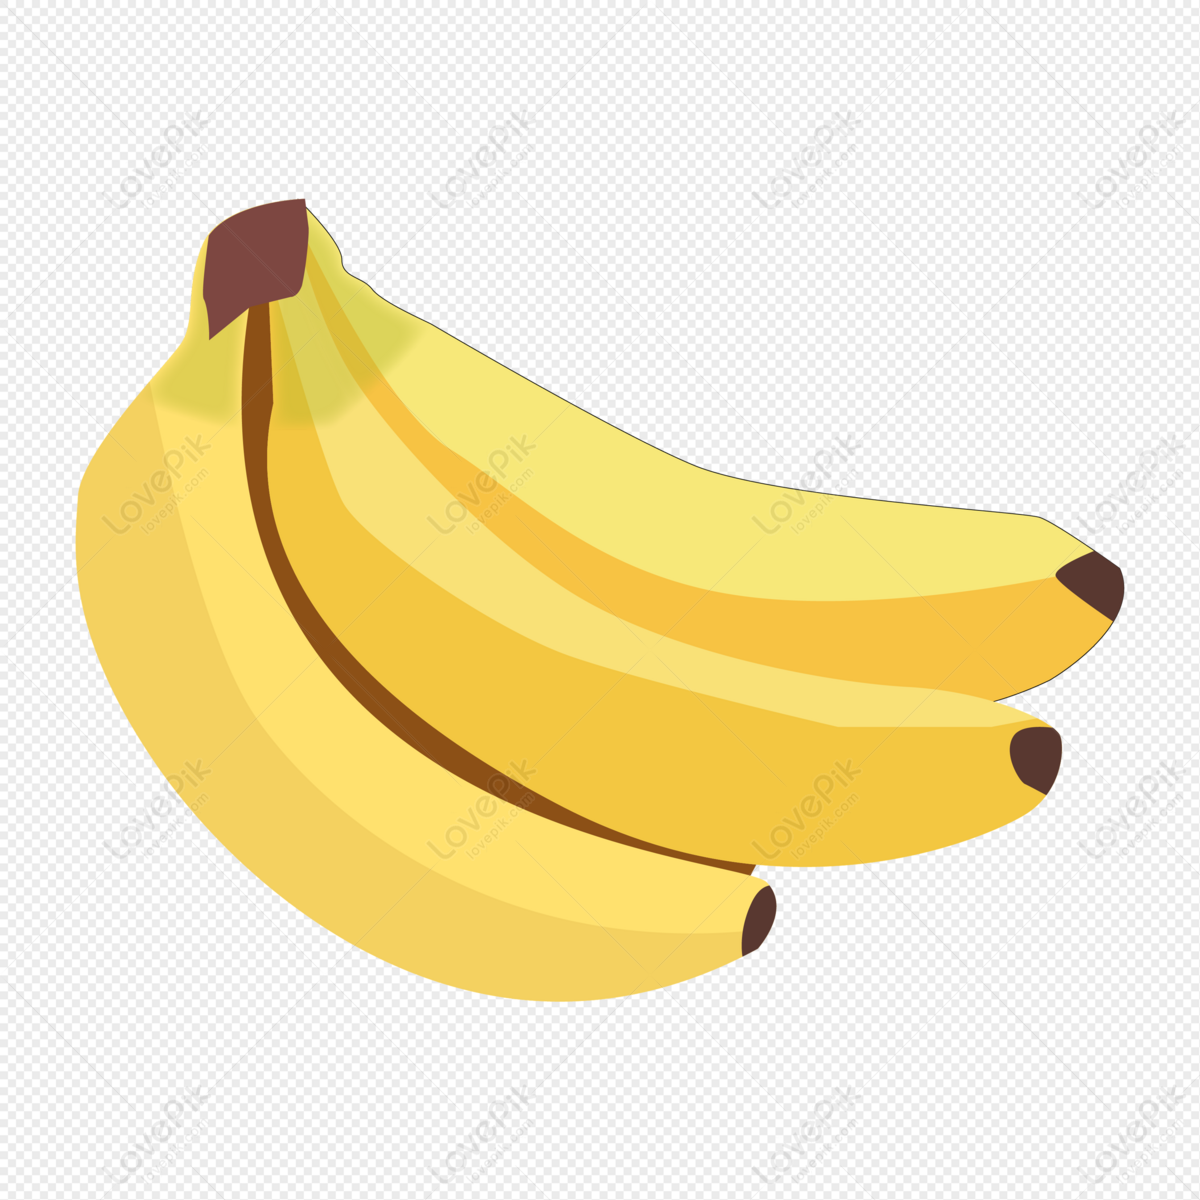 Cartoon Hand Drawn Fruit Banana PNG Image And Clipart Image For Free  Download - Lovepik | 401407968